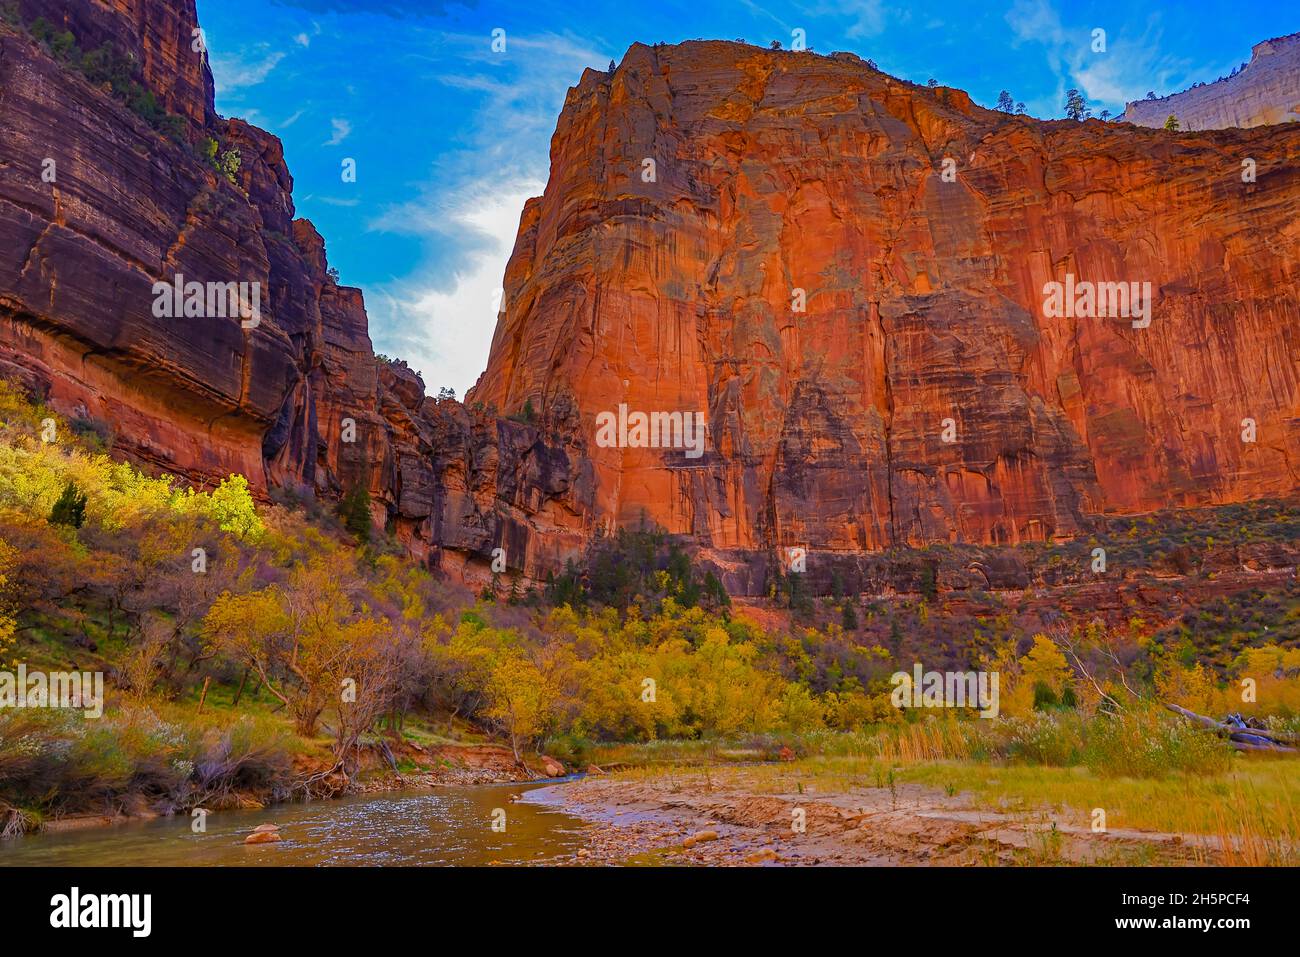 This is an autumn view Angels Landing in the Big Bend area of Zion Canyon in Zion National Park, Springdale, Washington County, Utah, USA. Stock Photo